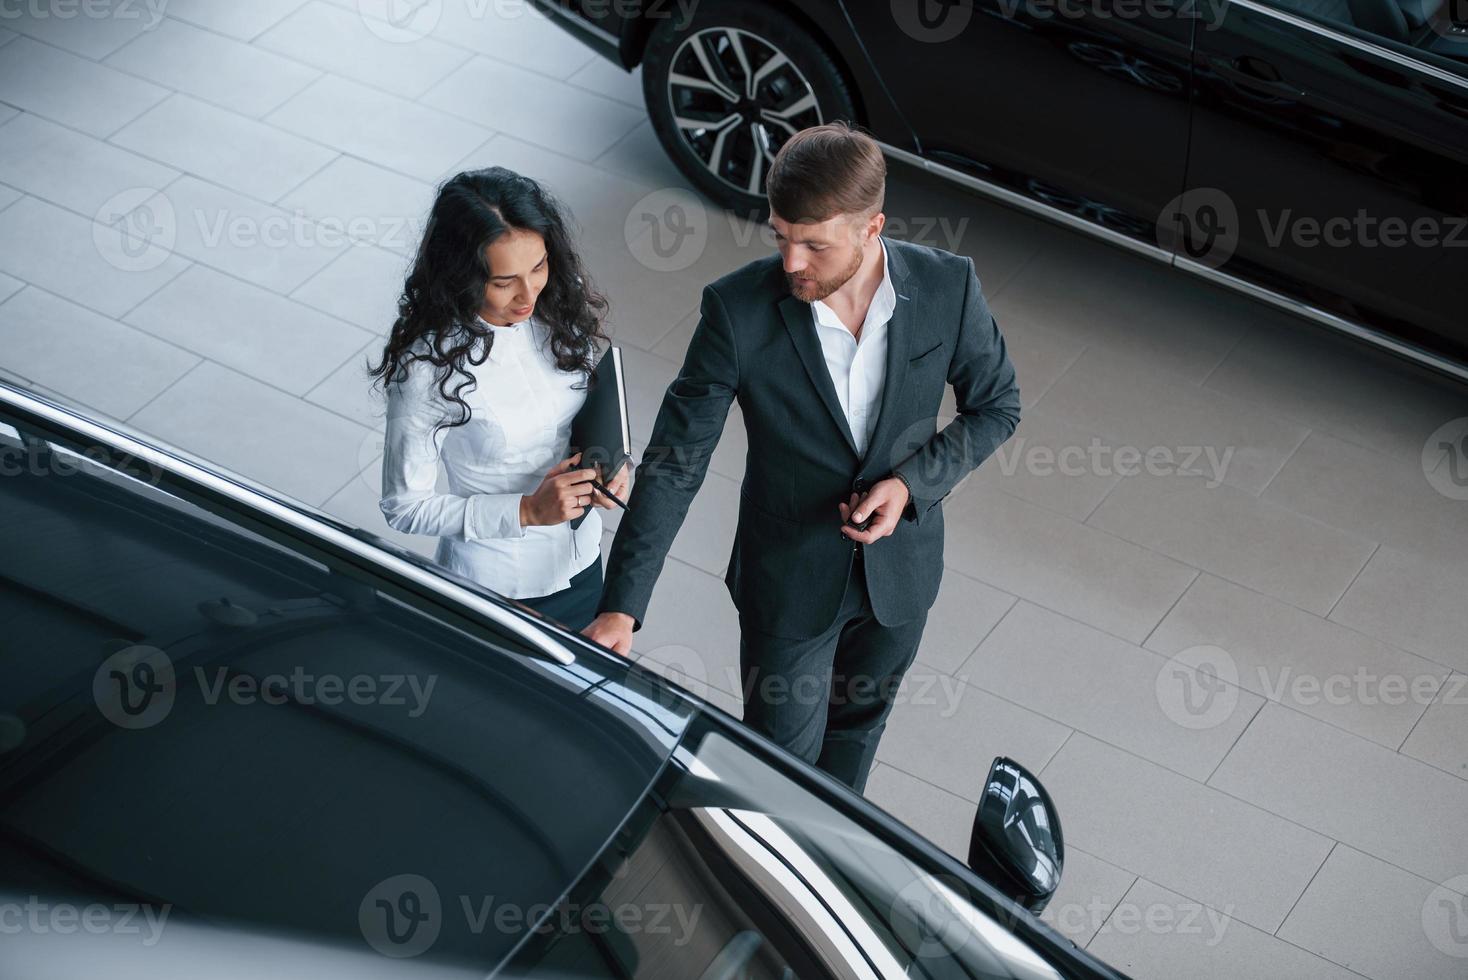 On the way to job. Female customer and modern stylish bearded businessman in the automobile saloon photo